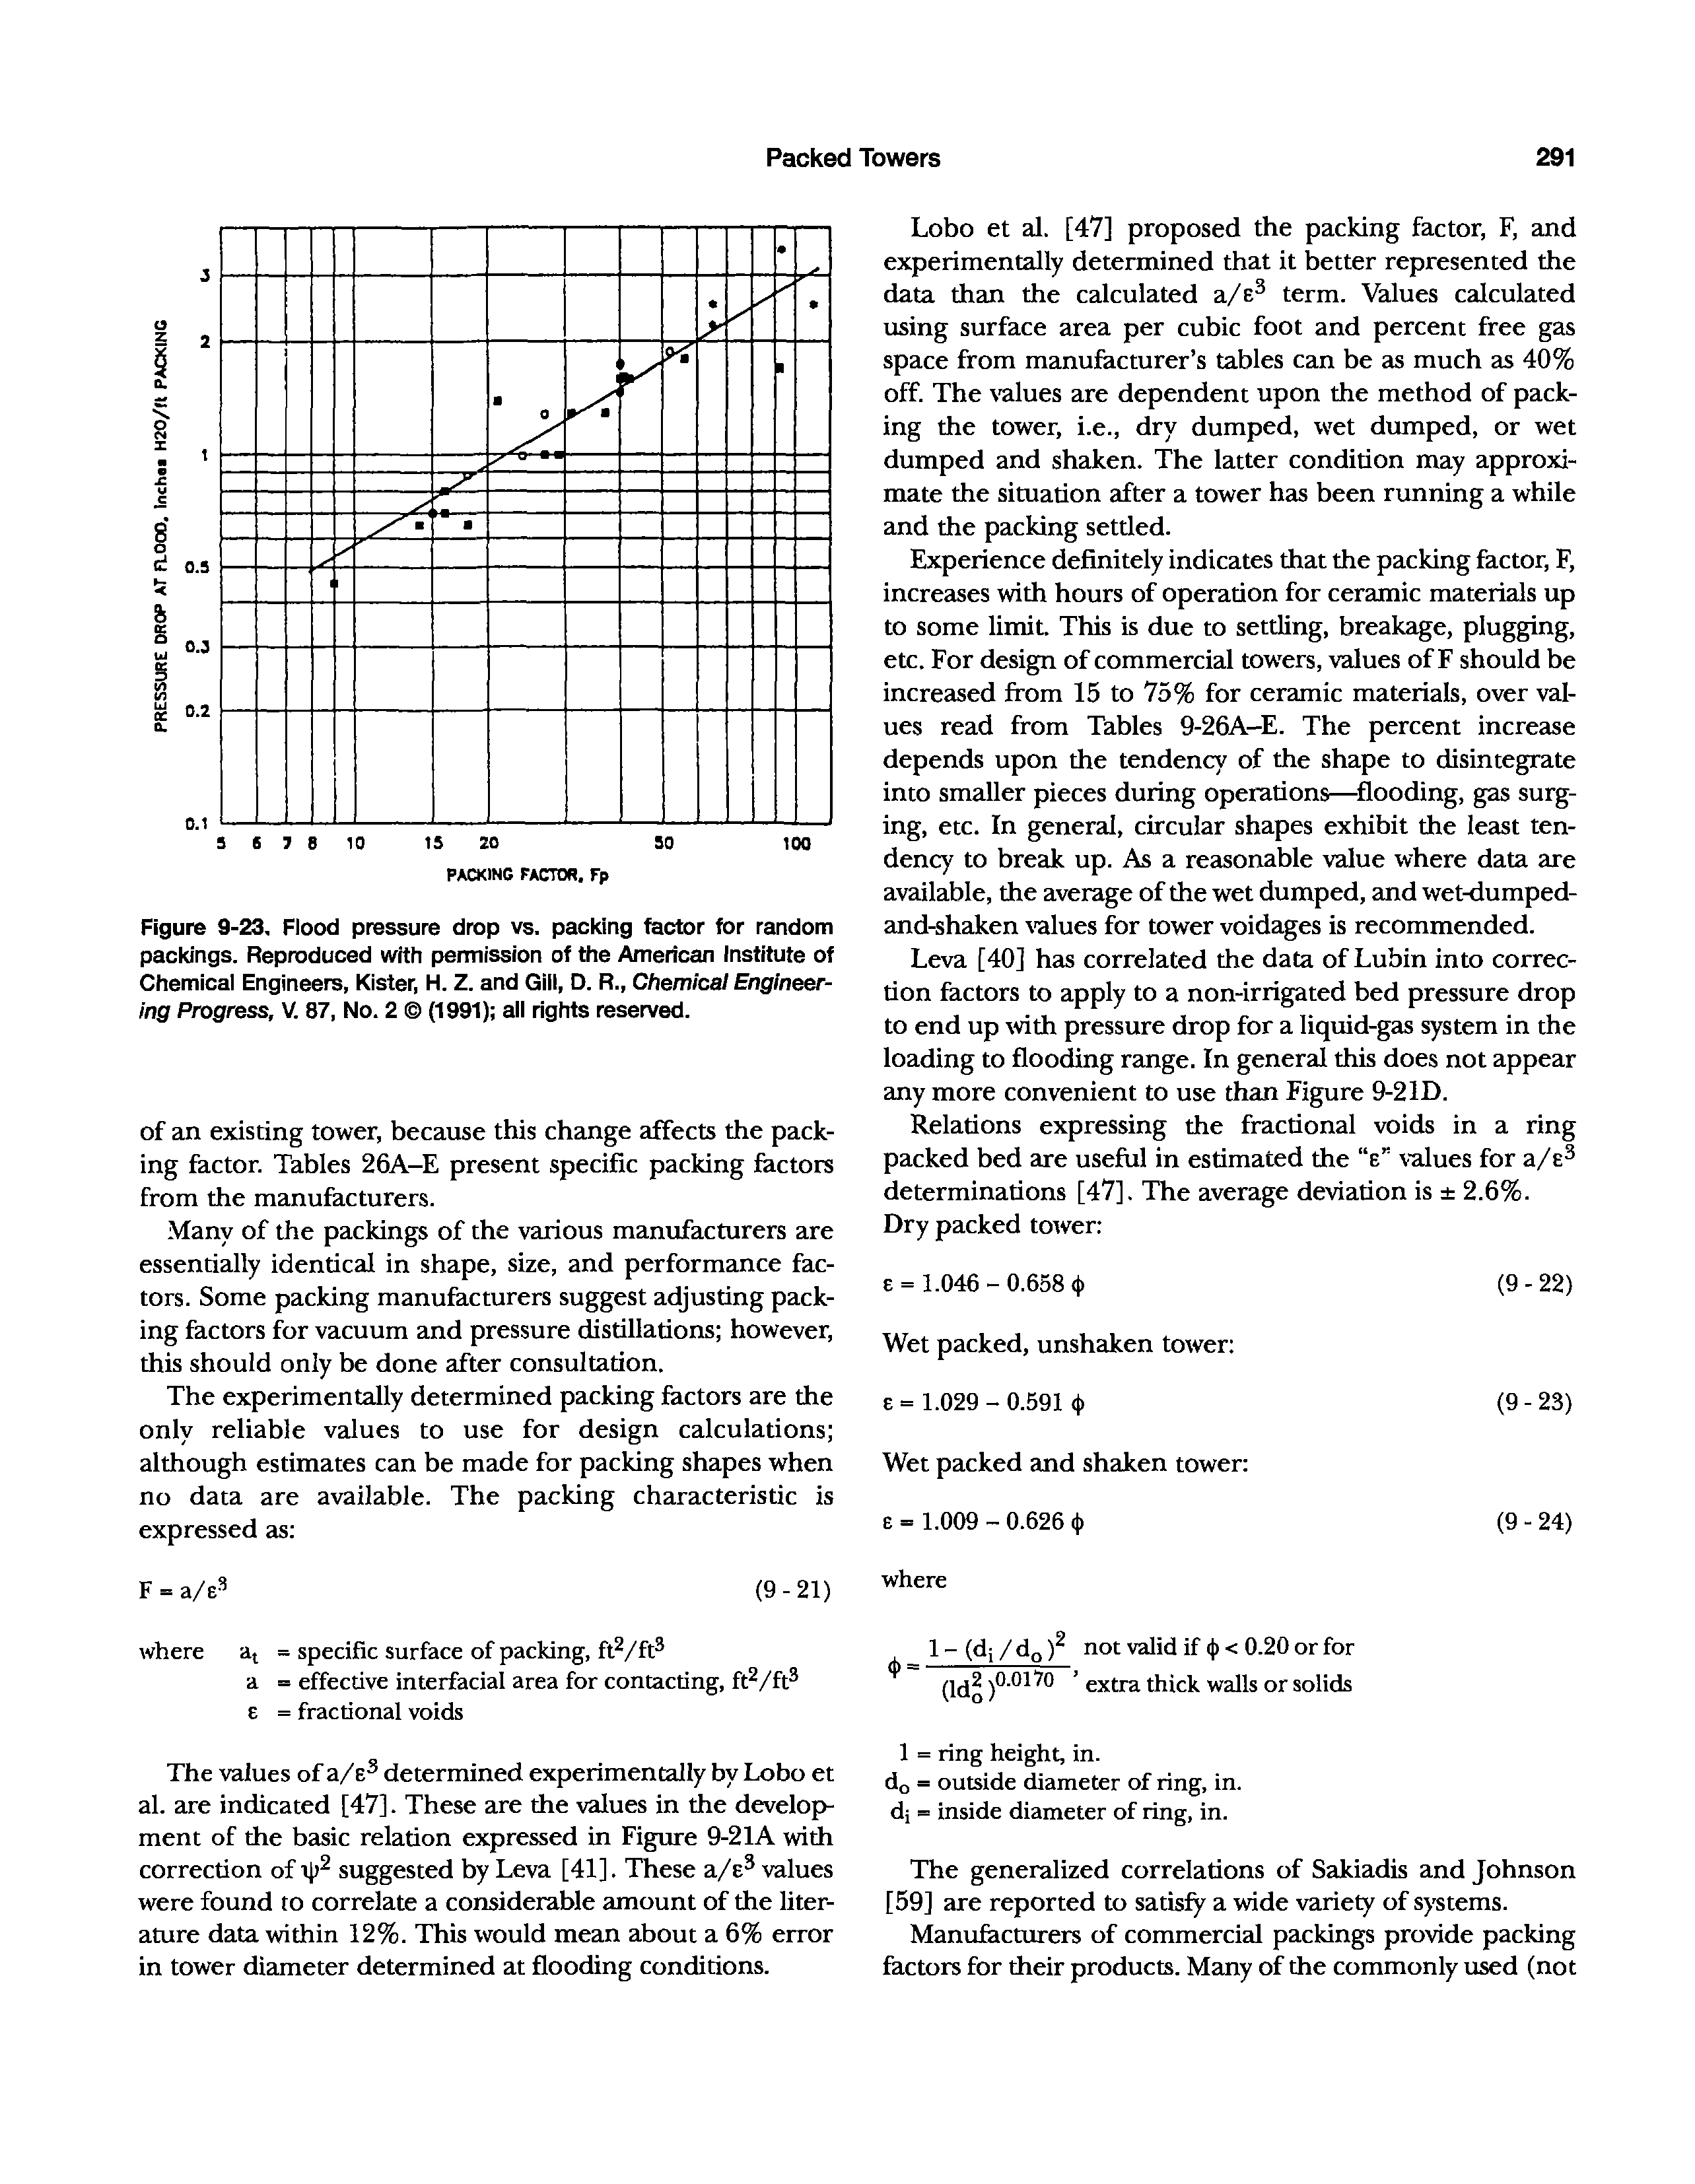 Figure 9-23. Flood pressure drop vs. packing factor for random packings. Reproduced with peimission of the American Institute of Chemical Engineers, KIster, H. Z. and Gill, D. R., Chemical Engineering Progress, V. 87, No. 2 (1991) all rights reserved.